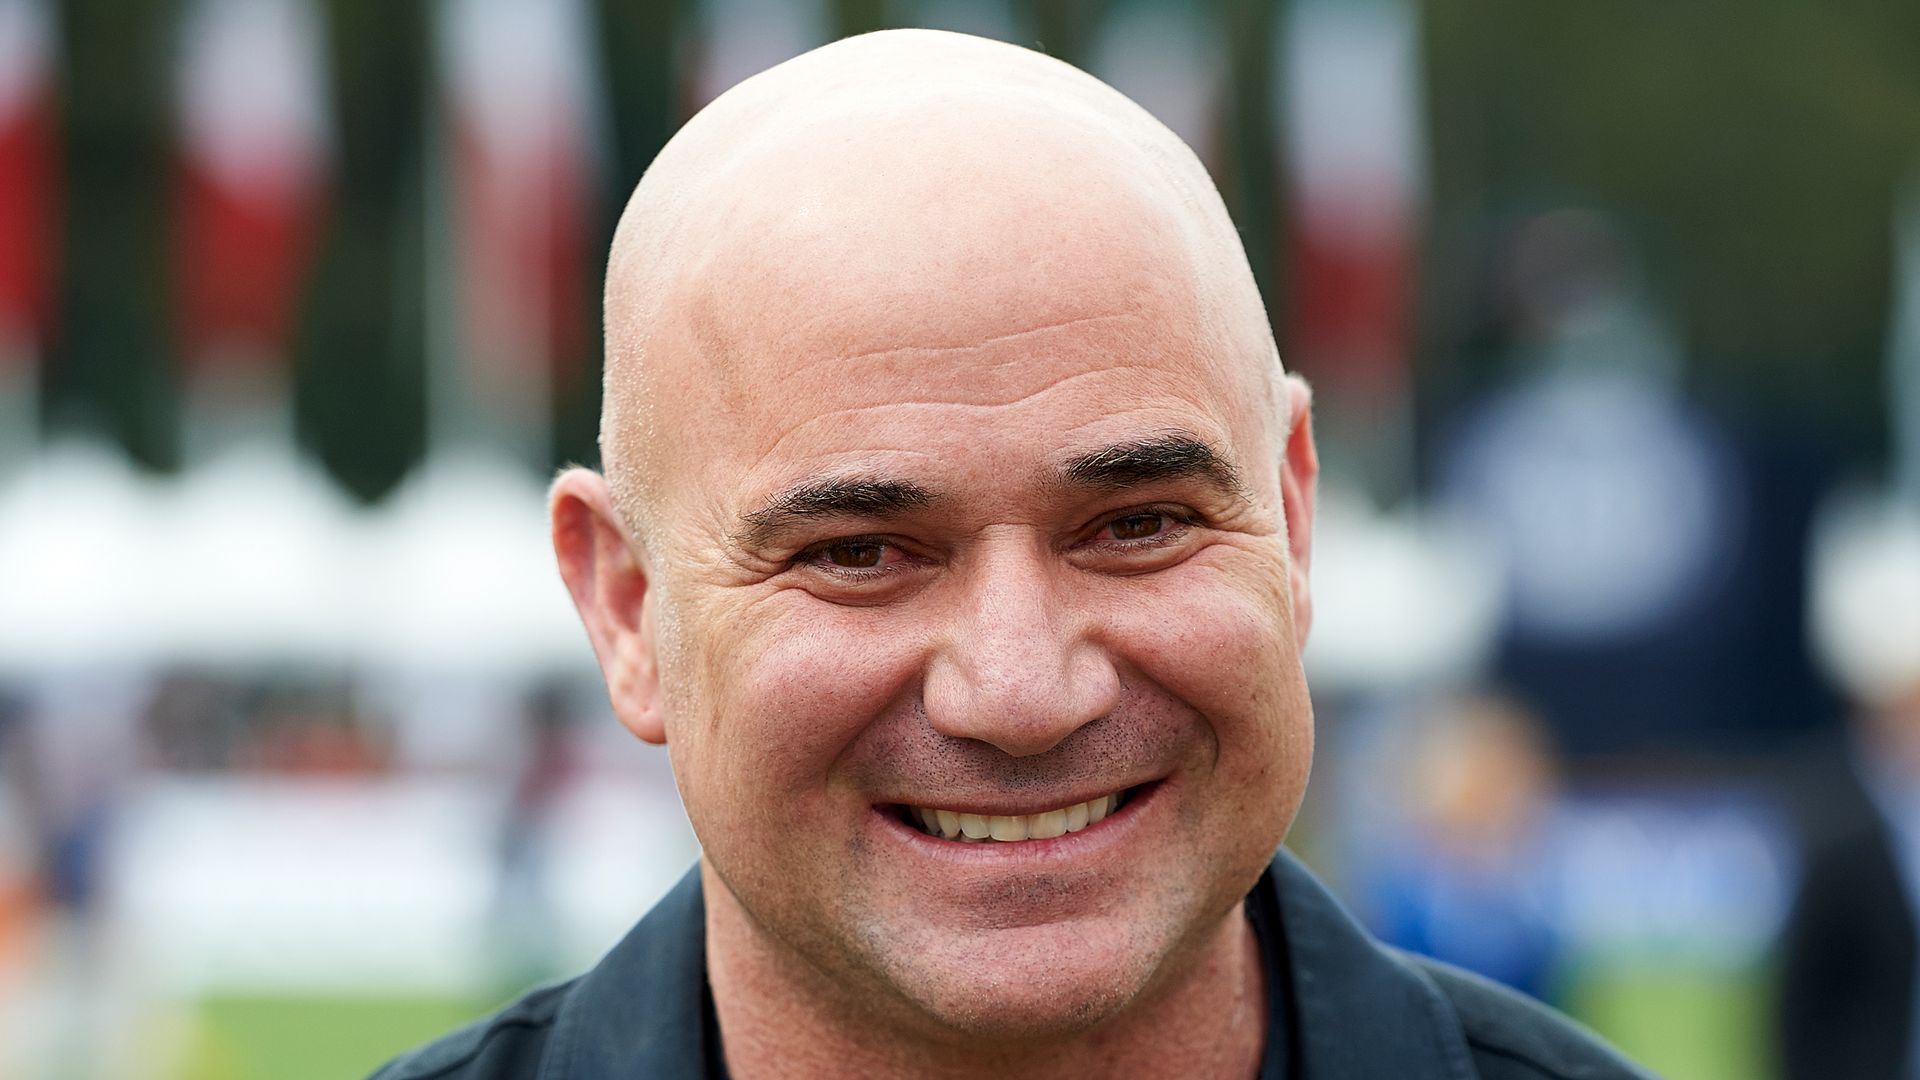 Andre Agassi smiling in black top 